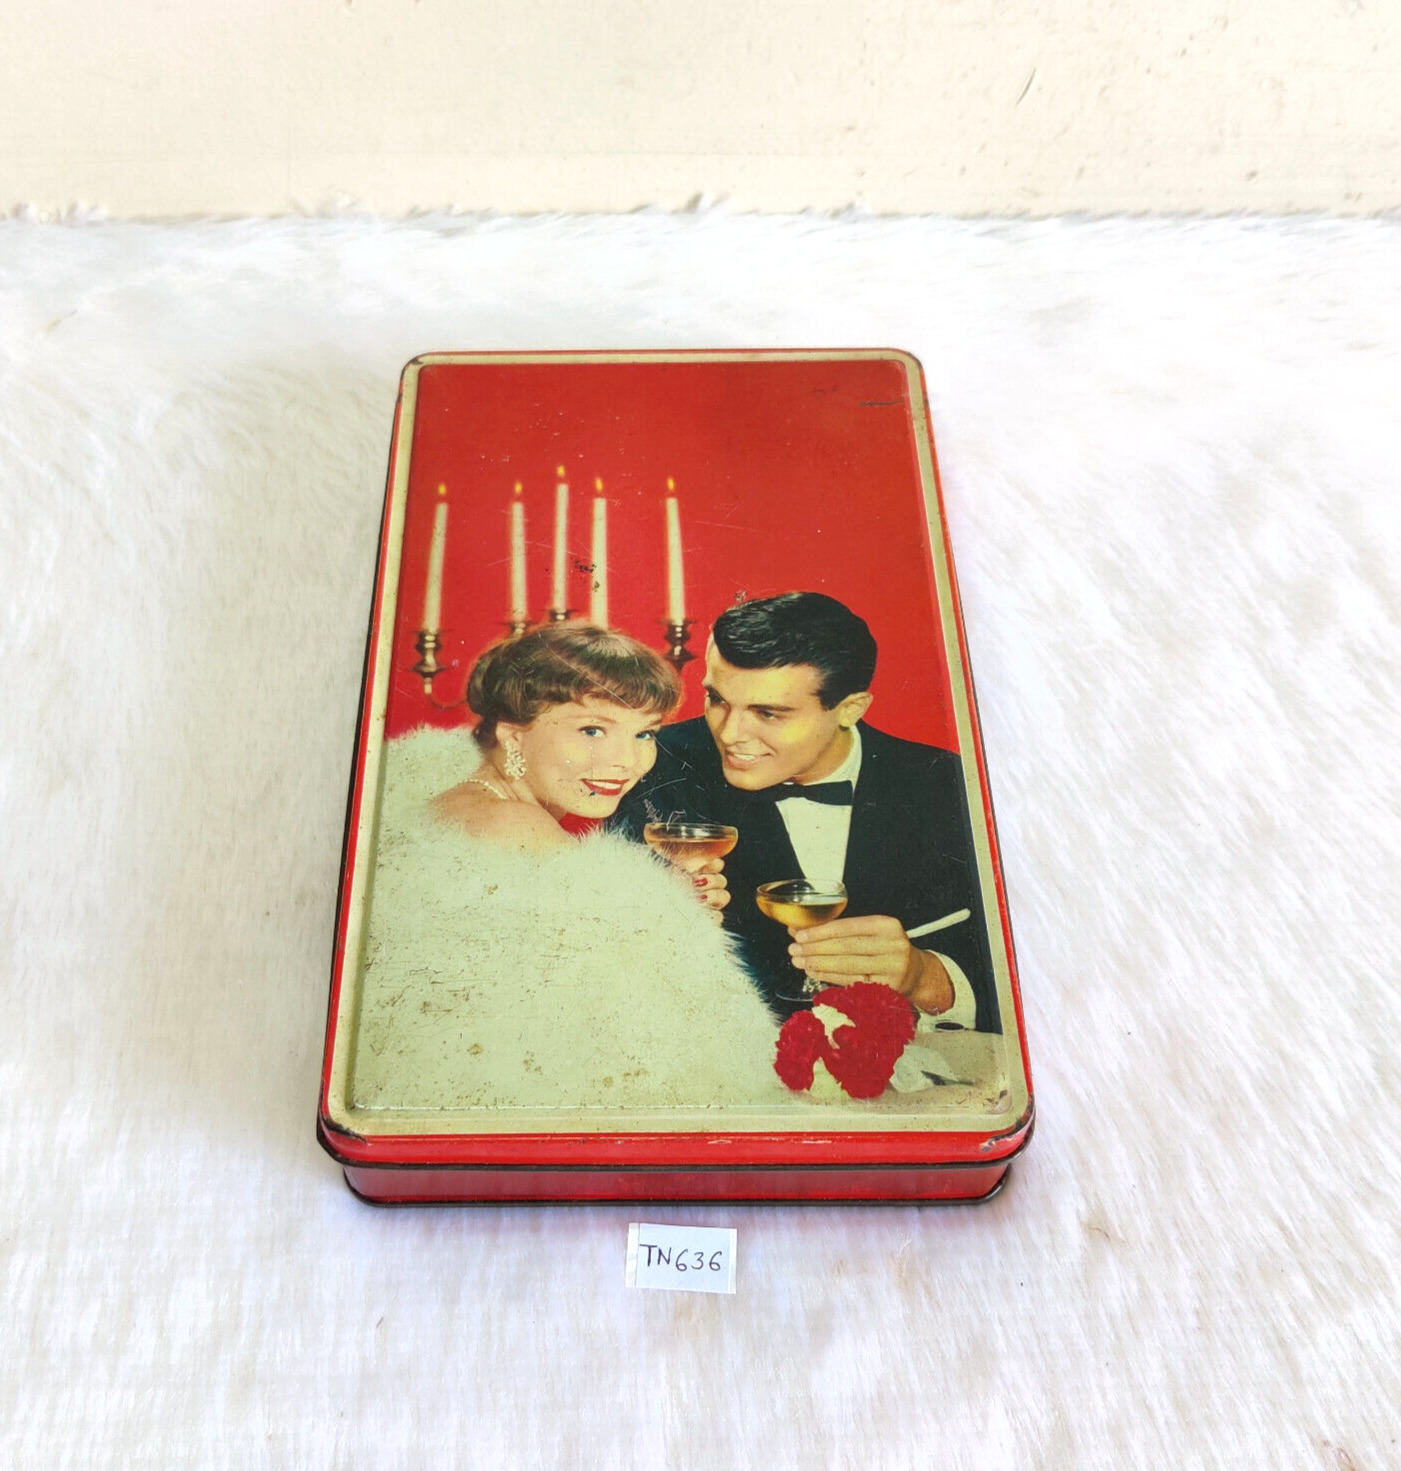 Vintage Couple Enjoying Party Graphics Tin Box Old Decorative Collectible TN636